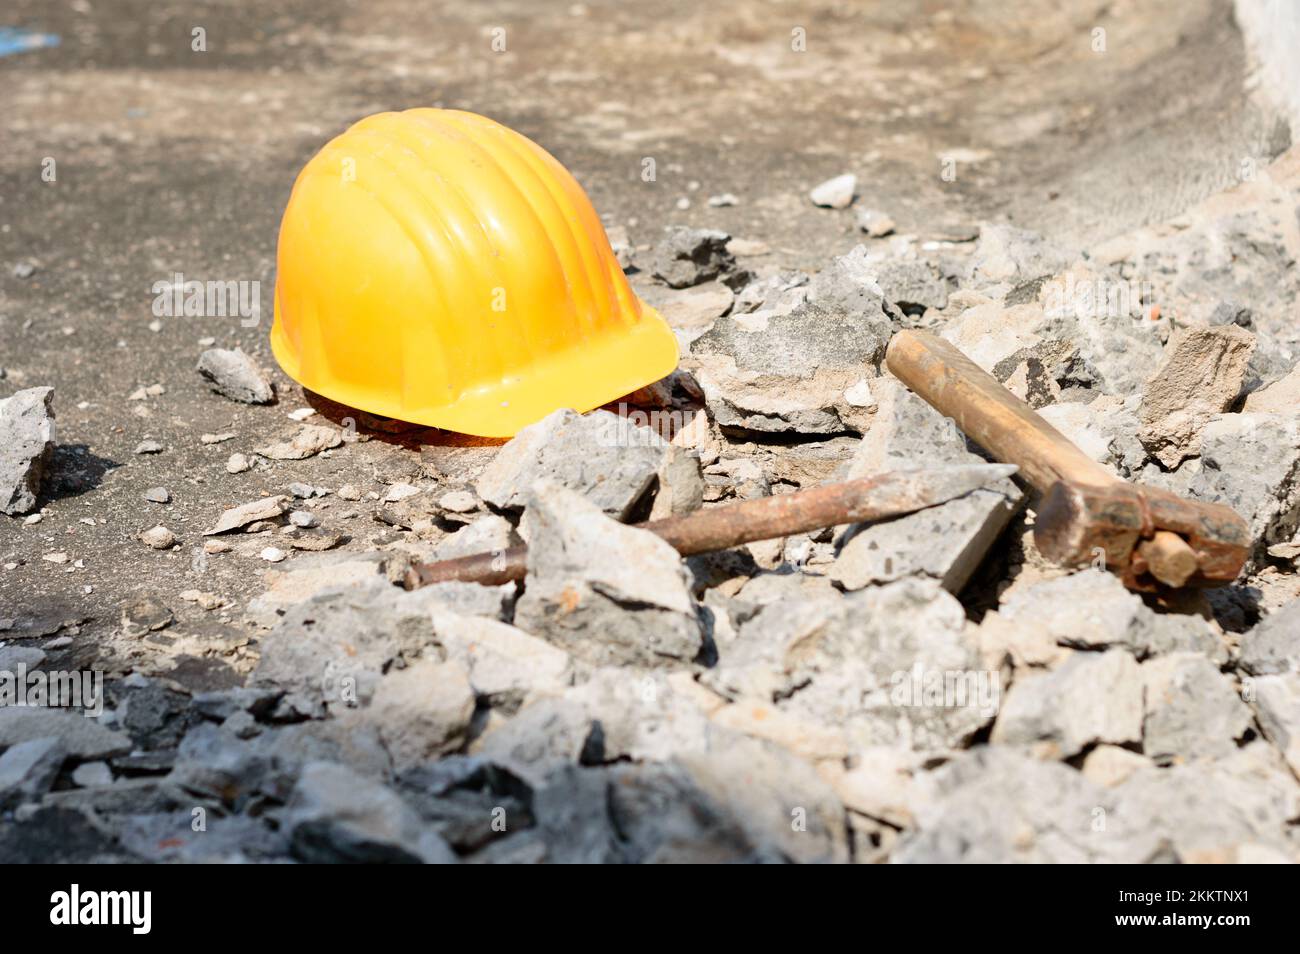 Safety Helmet in Construction Site. Yellow Hat. Safety Precautions Measures in Industrial workplace Background Concepts. Stock Photo